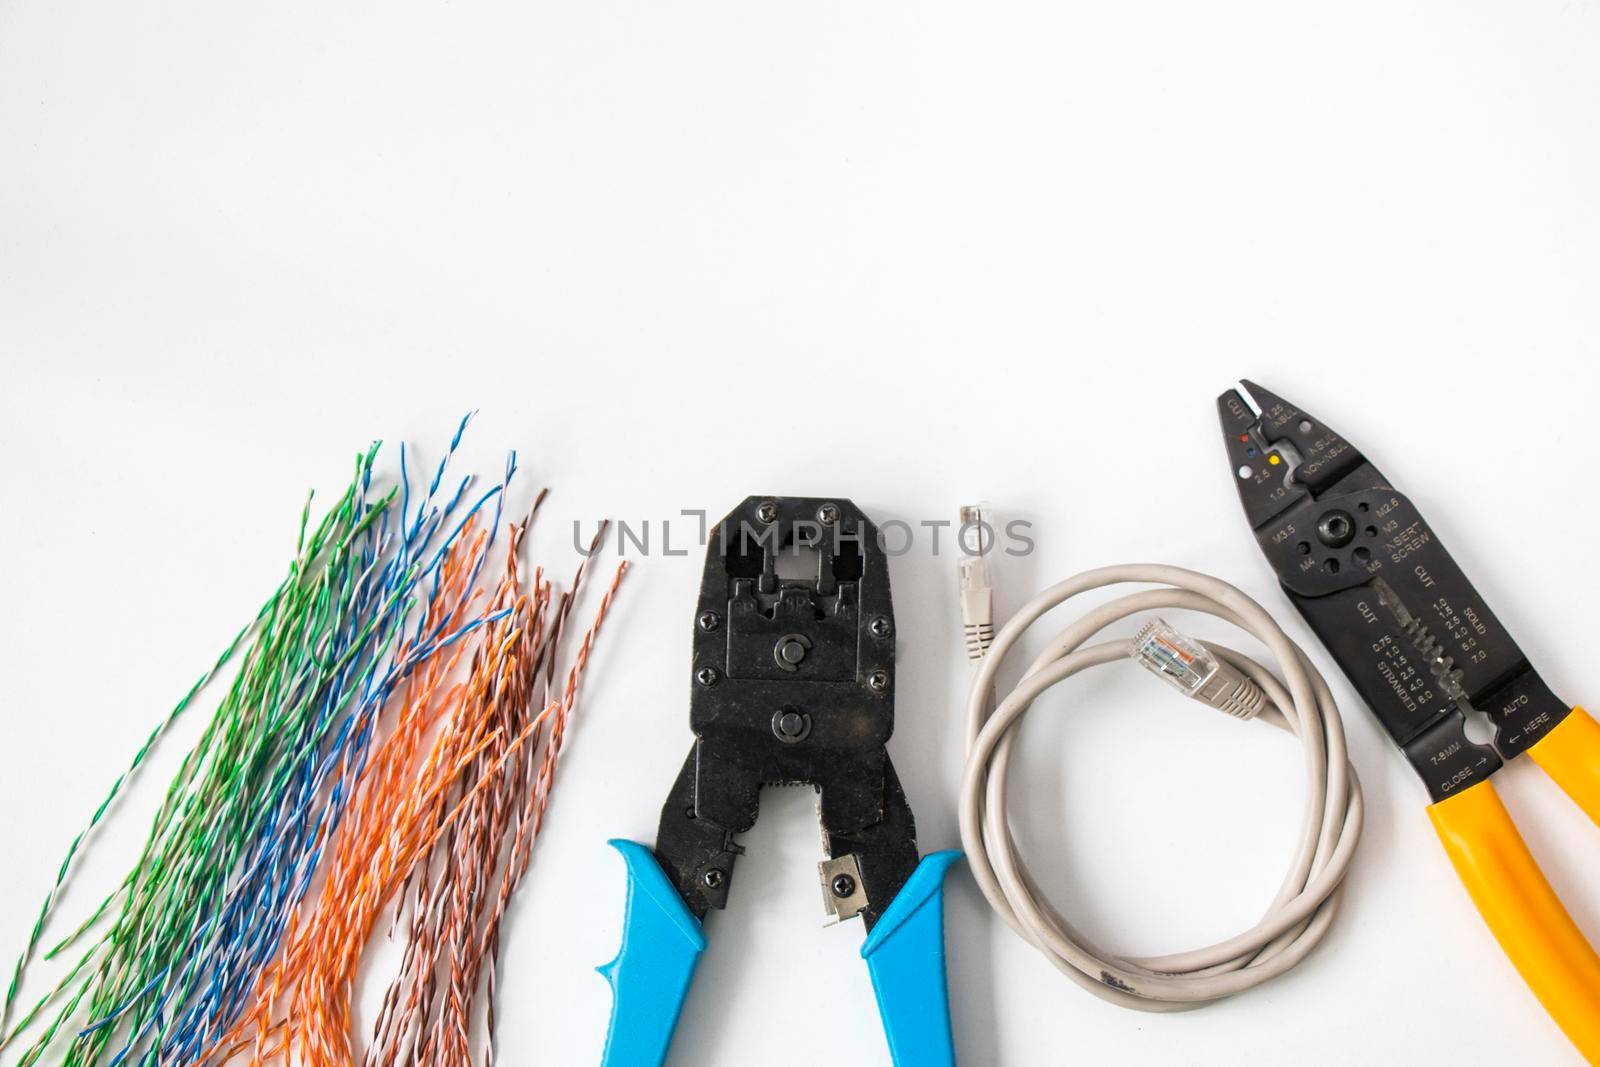 Internet cable and tools on the white background by Taidundua